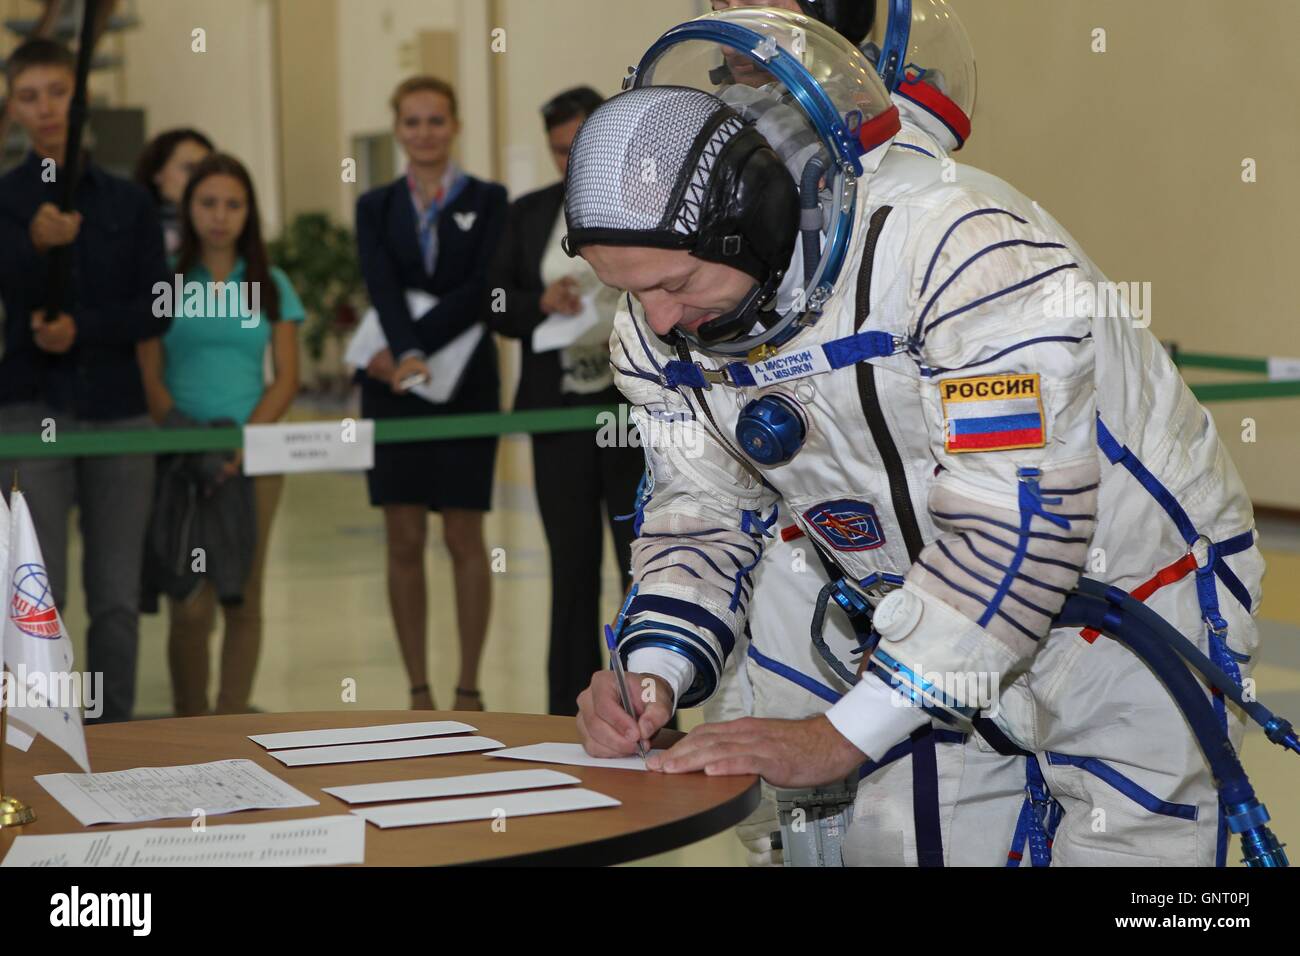 International Space Station Expedition 49-50 backup crew member Russian cosmonaut Alexander Misurkin signs in for final qualification exams at the Gagarin Cosmonaut Training Center August 30, 2016 at Star City, Russia. Stock Photo